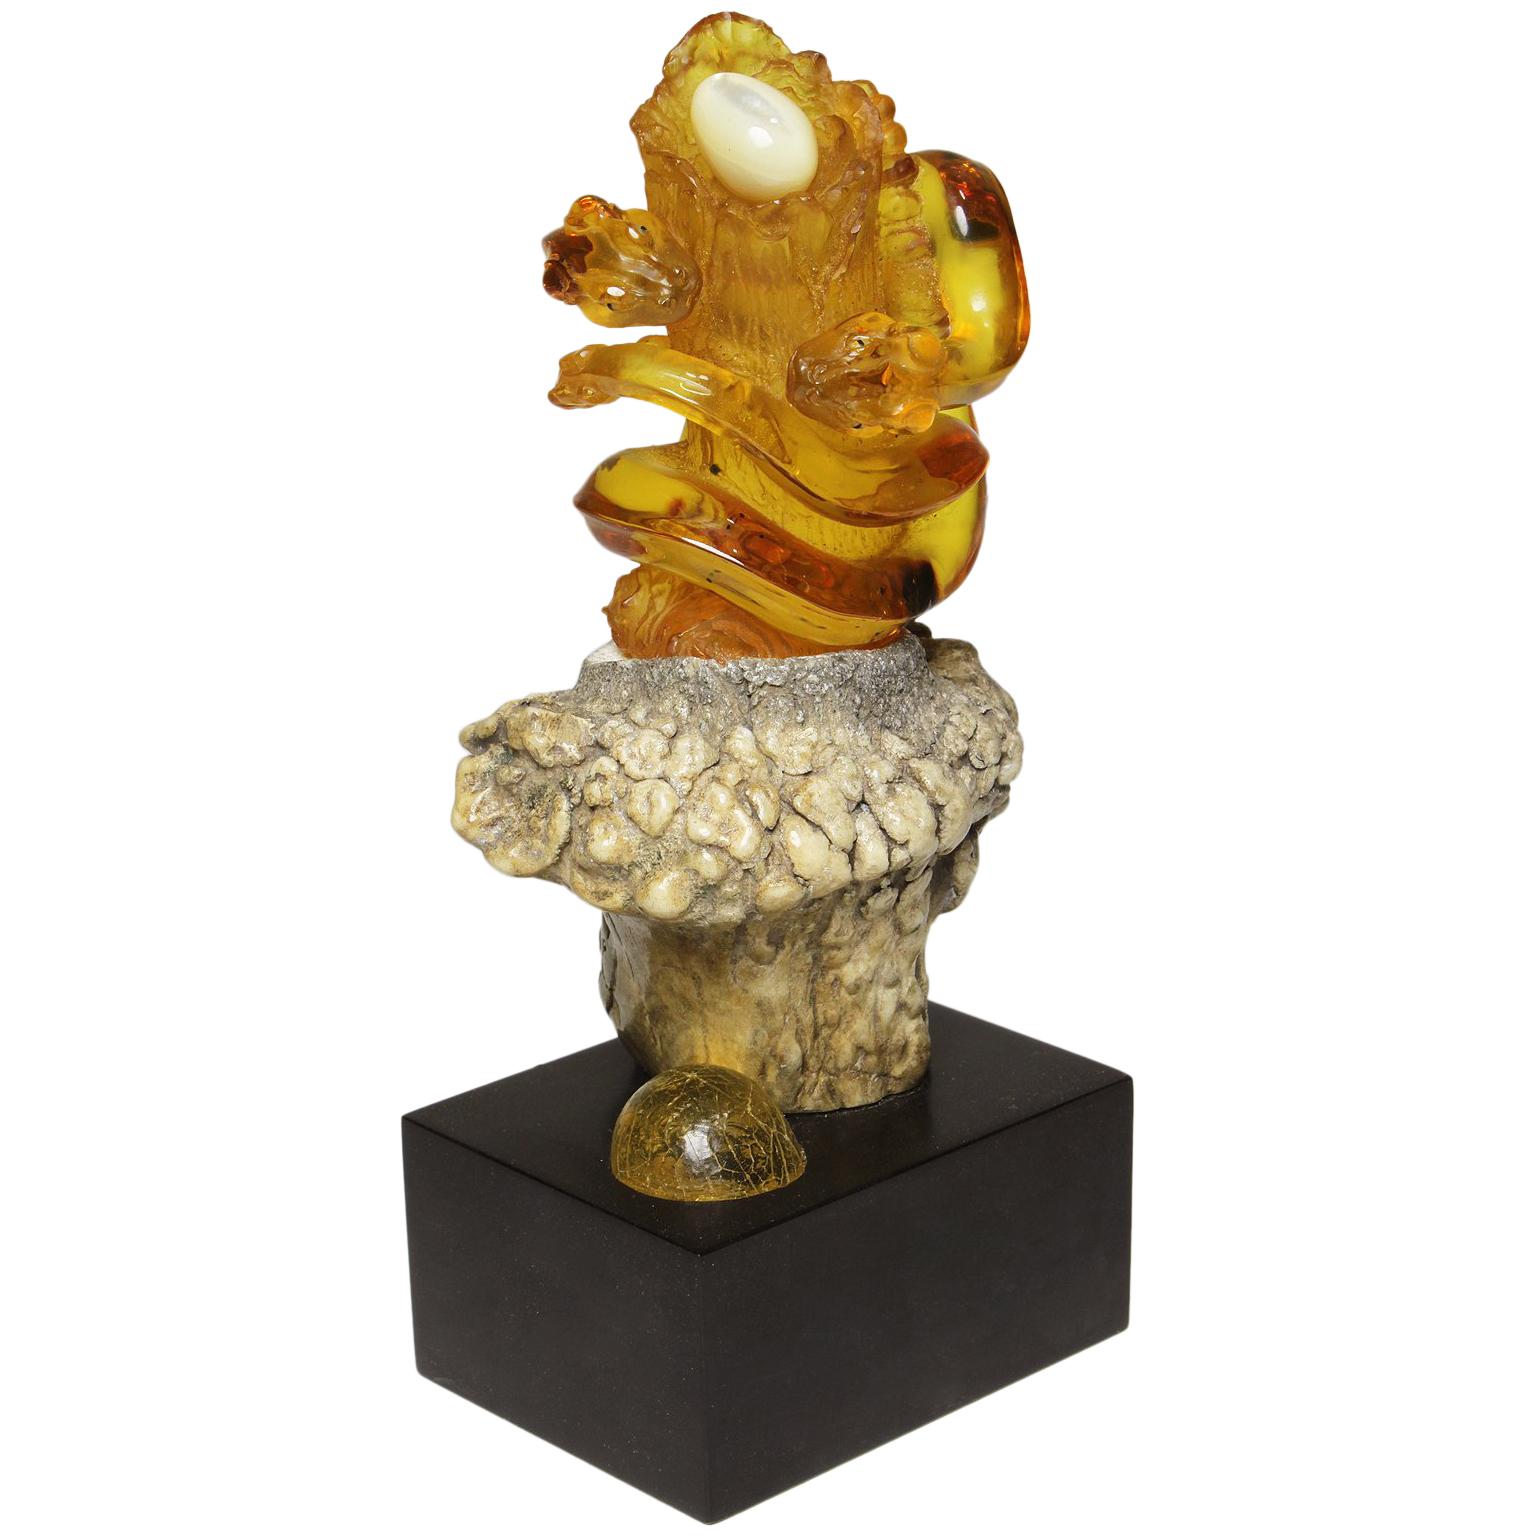 Carved Natural Amber Sculpture "Nesting Snakes"  by Lee Downey Bali, Indonesia